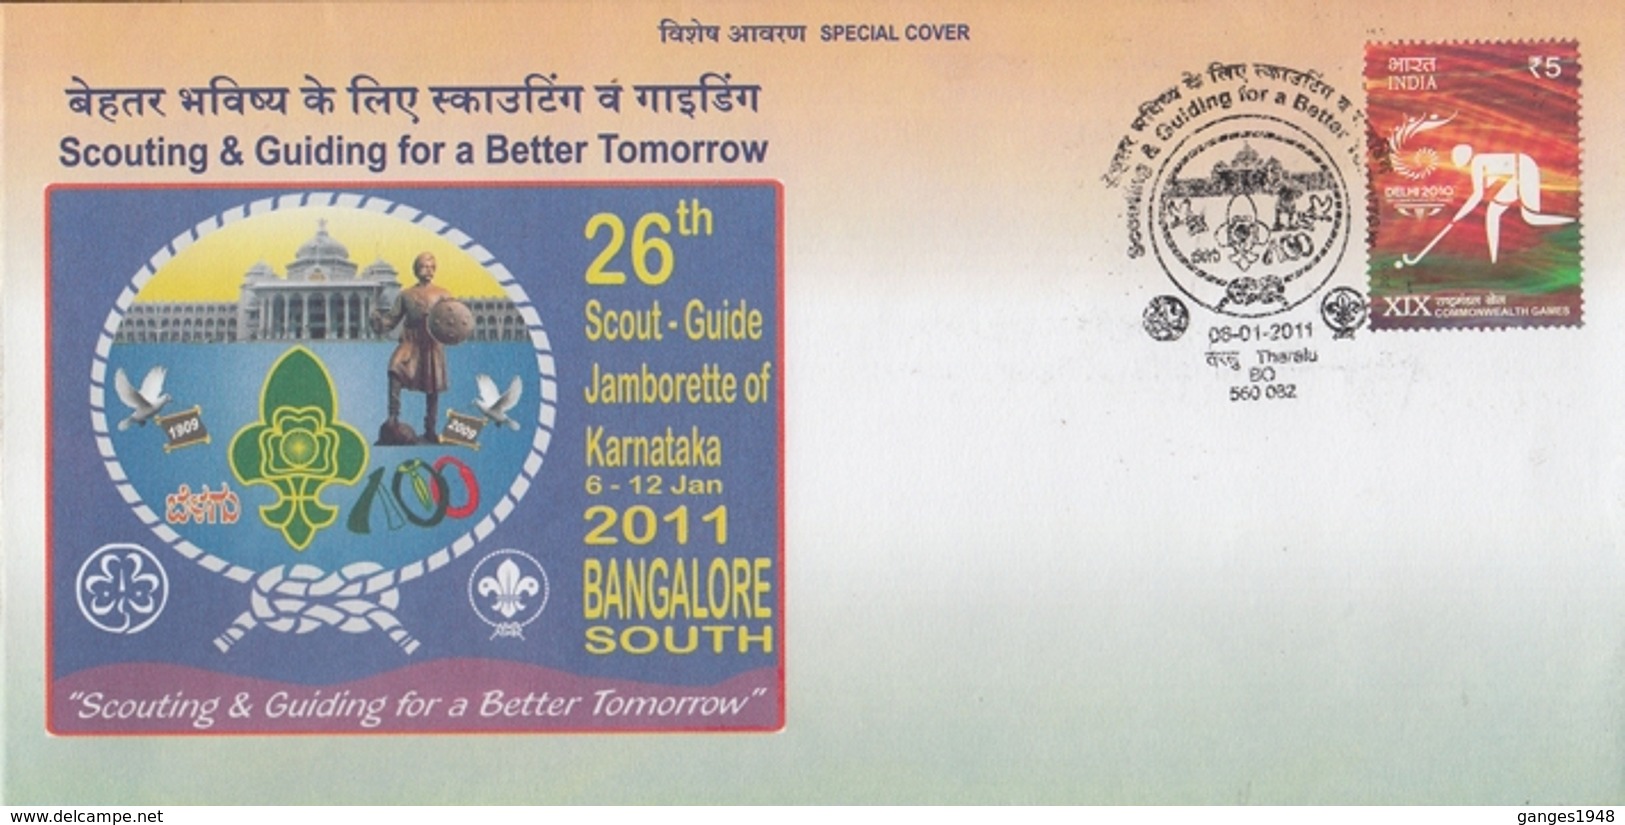 India  2011  Scouting  26th Scout - Guide Jamborette  Tharalu  Special Cover # 75097 Inde Indien - Covers & Documents